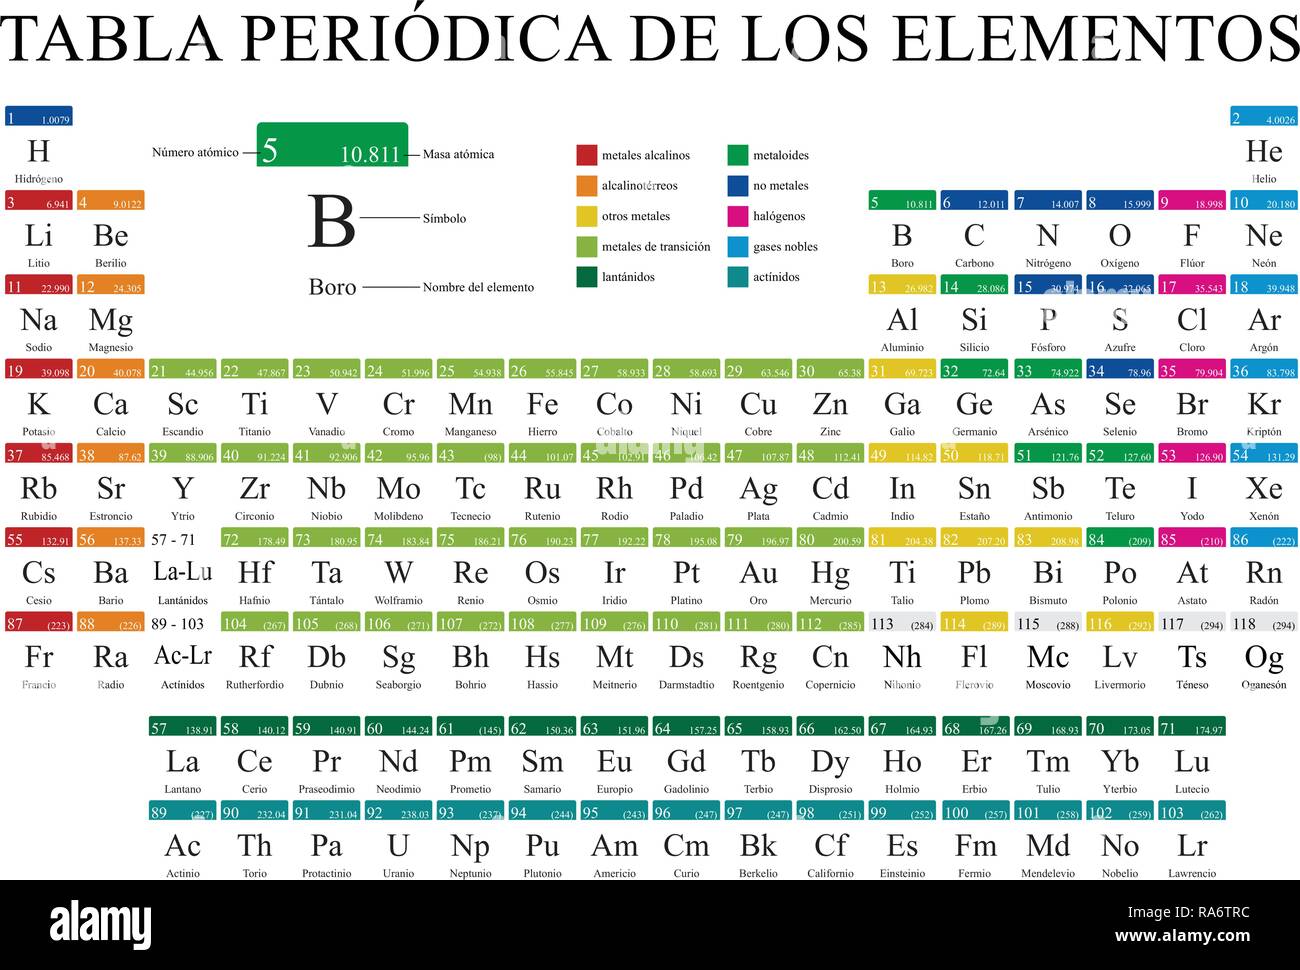 TABLA PERIODICA DE LOS ELEMENTOS -Periodic Table of Elements in Spanish language- in full color with the 4 new elements included on November 28, 2016 Stock Vector